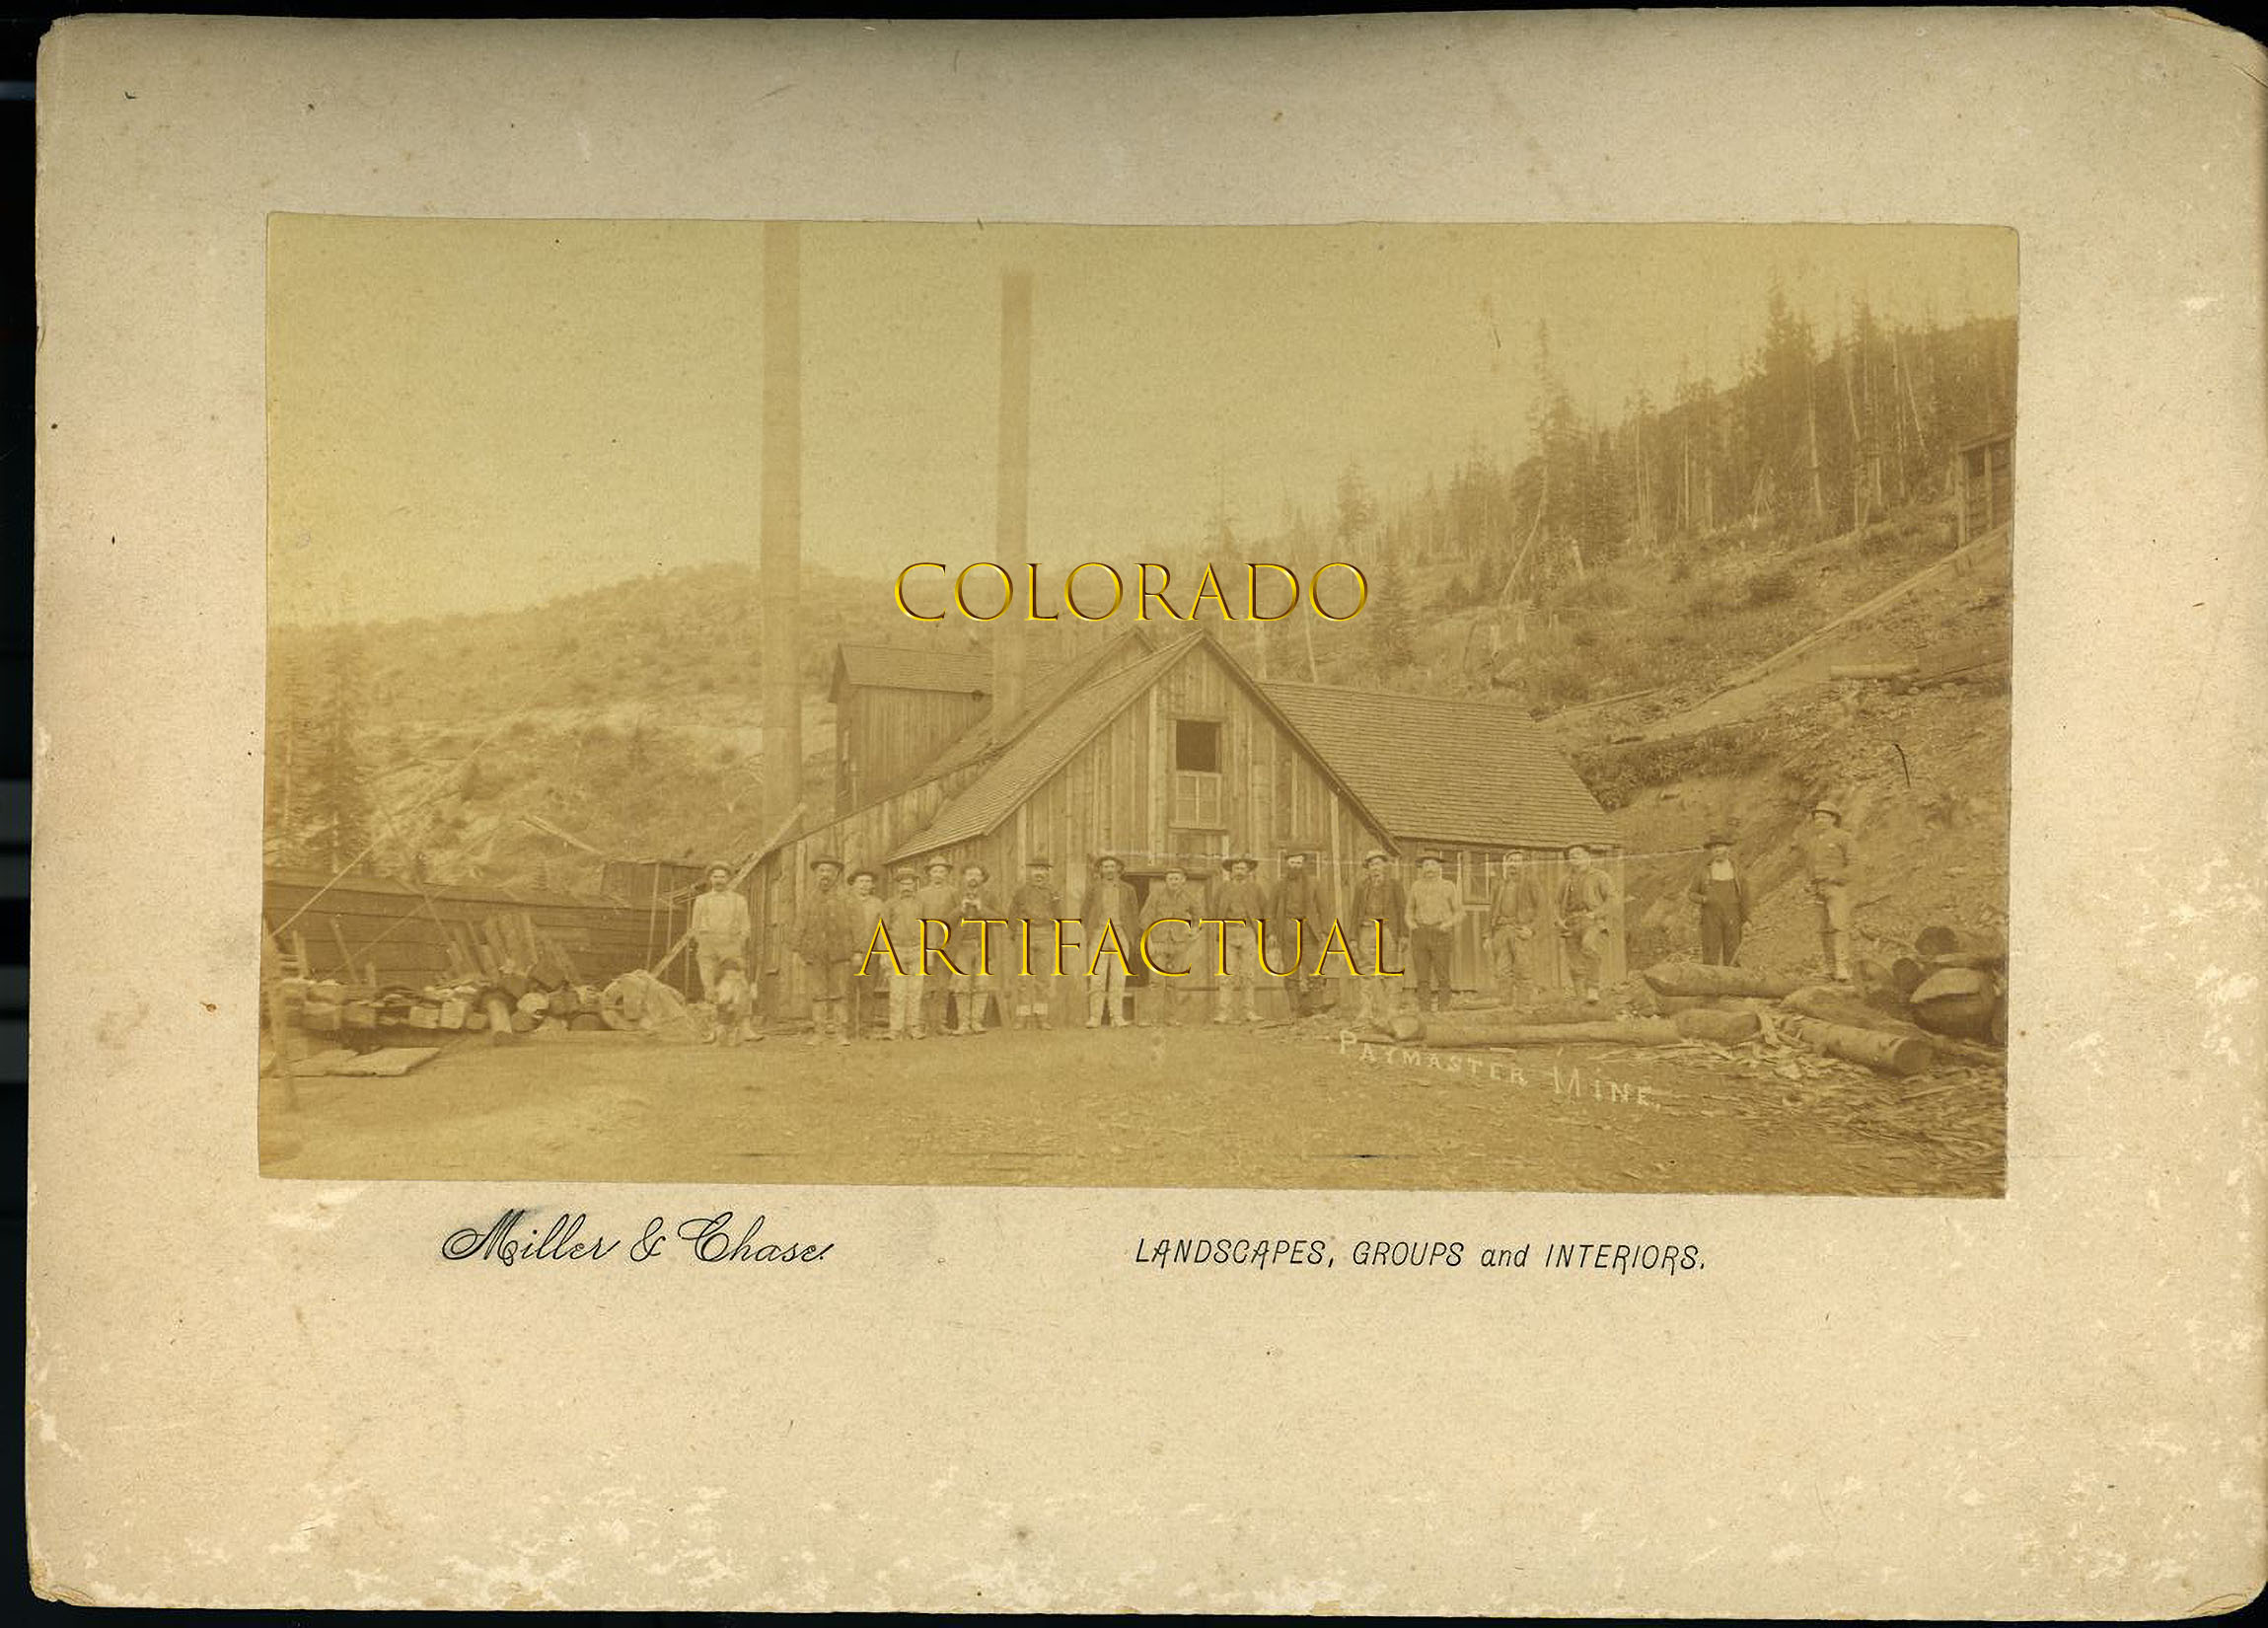 Paymaster Mine Iron Springs Mining District San Miguel County Colorado Miller & Chase original photograph 1883